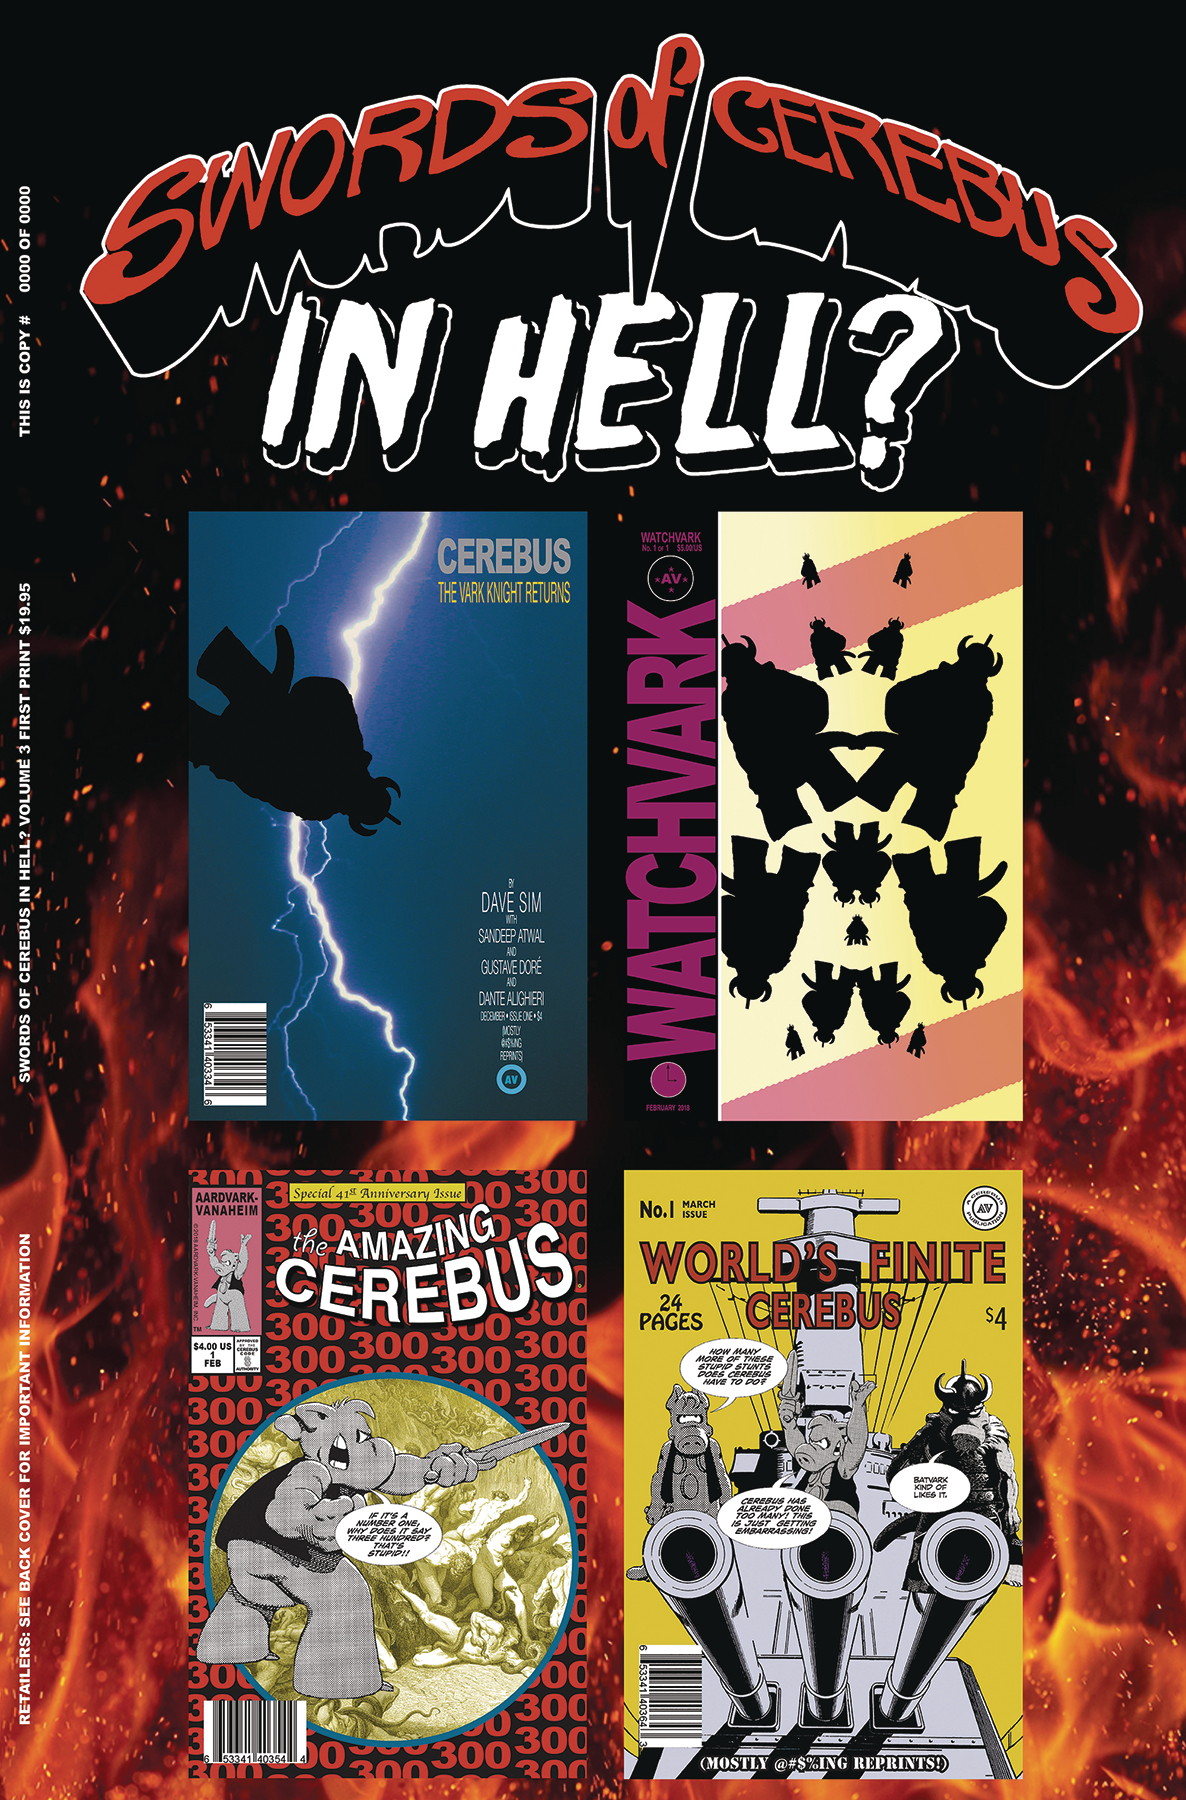 Swords of Cerebus In Hell Graphic Novel Volume 3